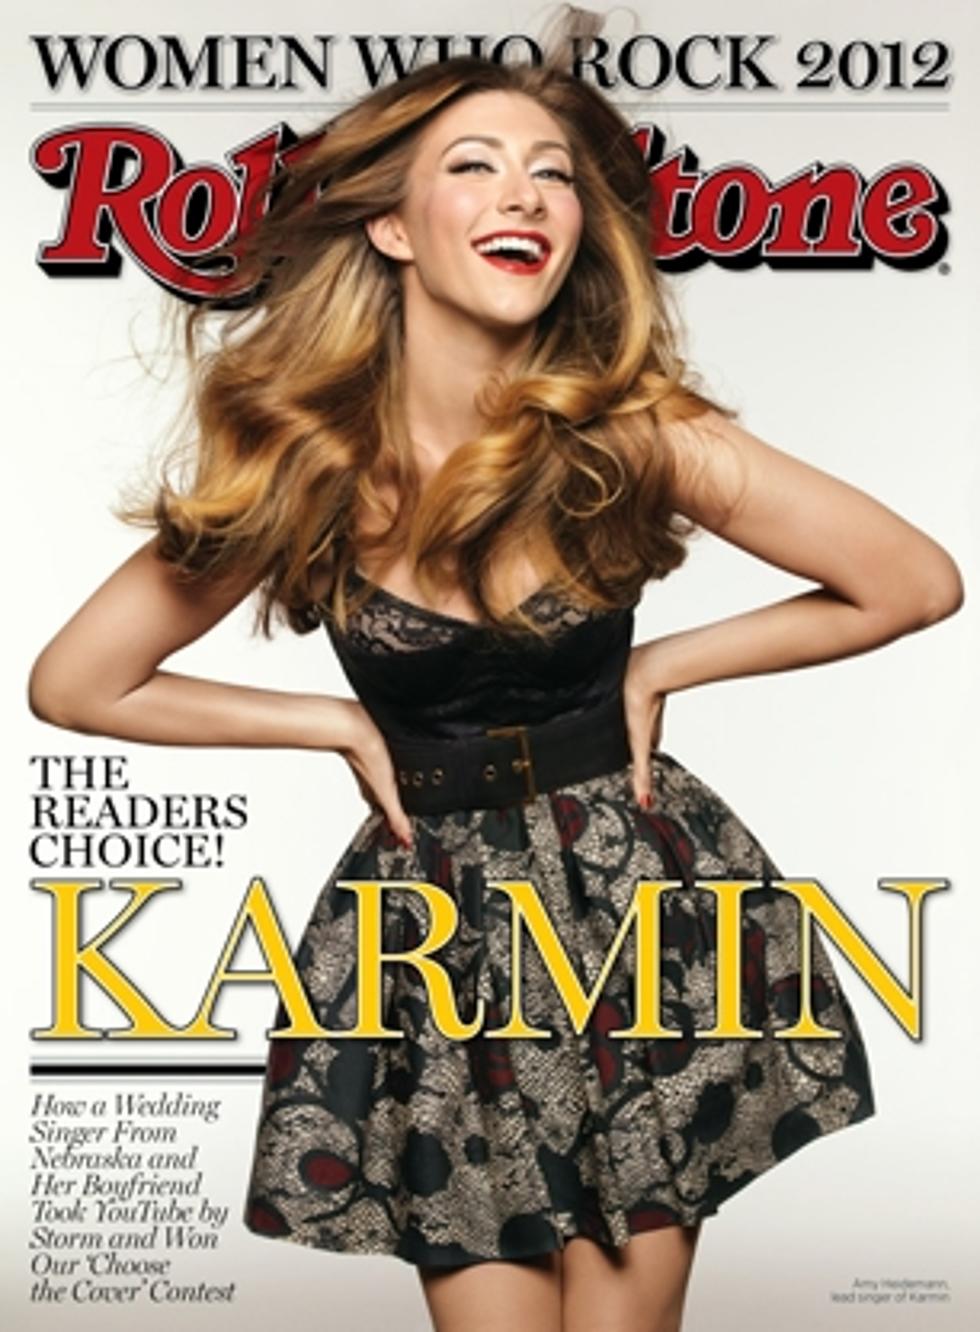 Karmin Graces The Cover Of Rolling Stone! Coolest Cover To Date They Say&#8230;What Do You Think? [Photo]